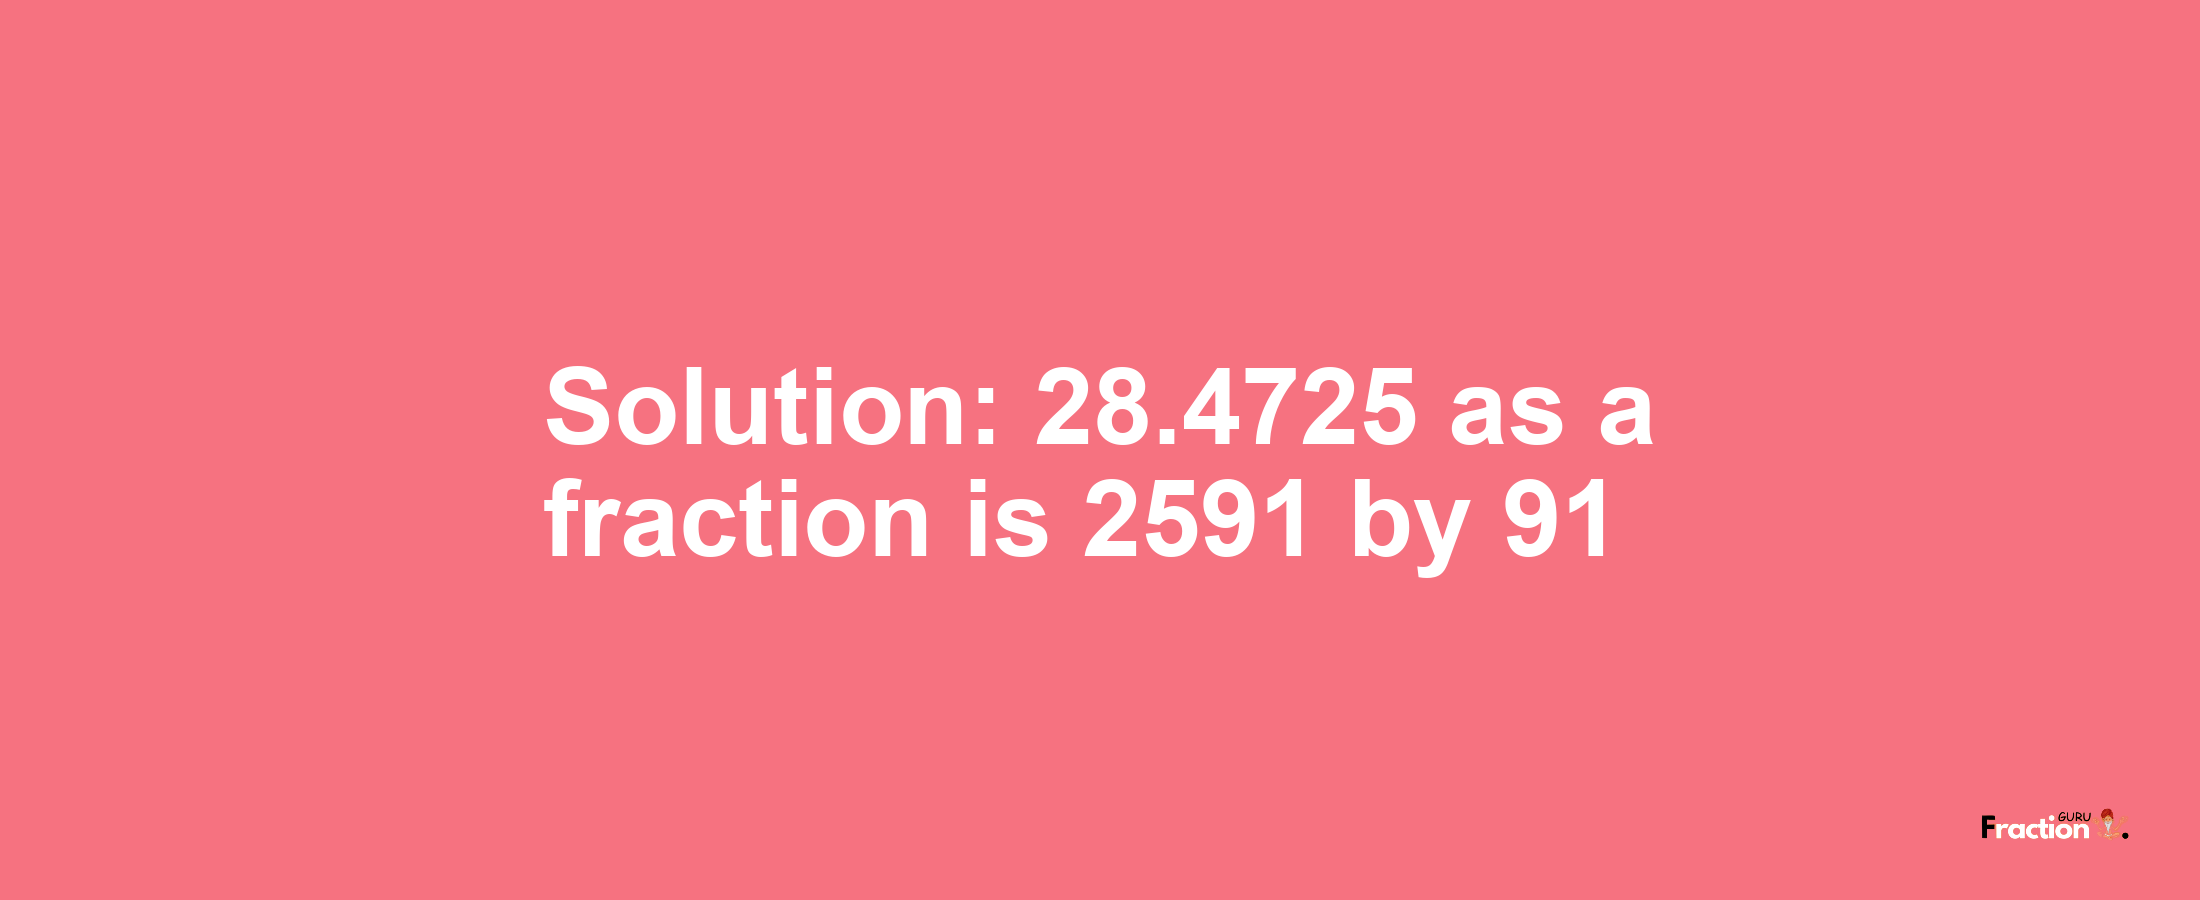 Solution:28.4725 as a fraction is 2591/91